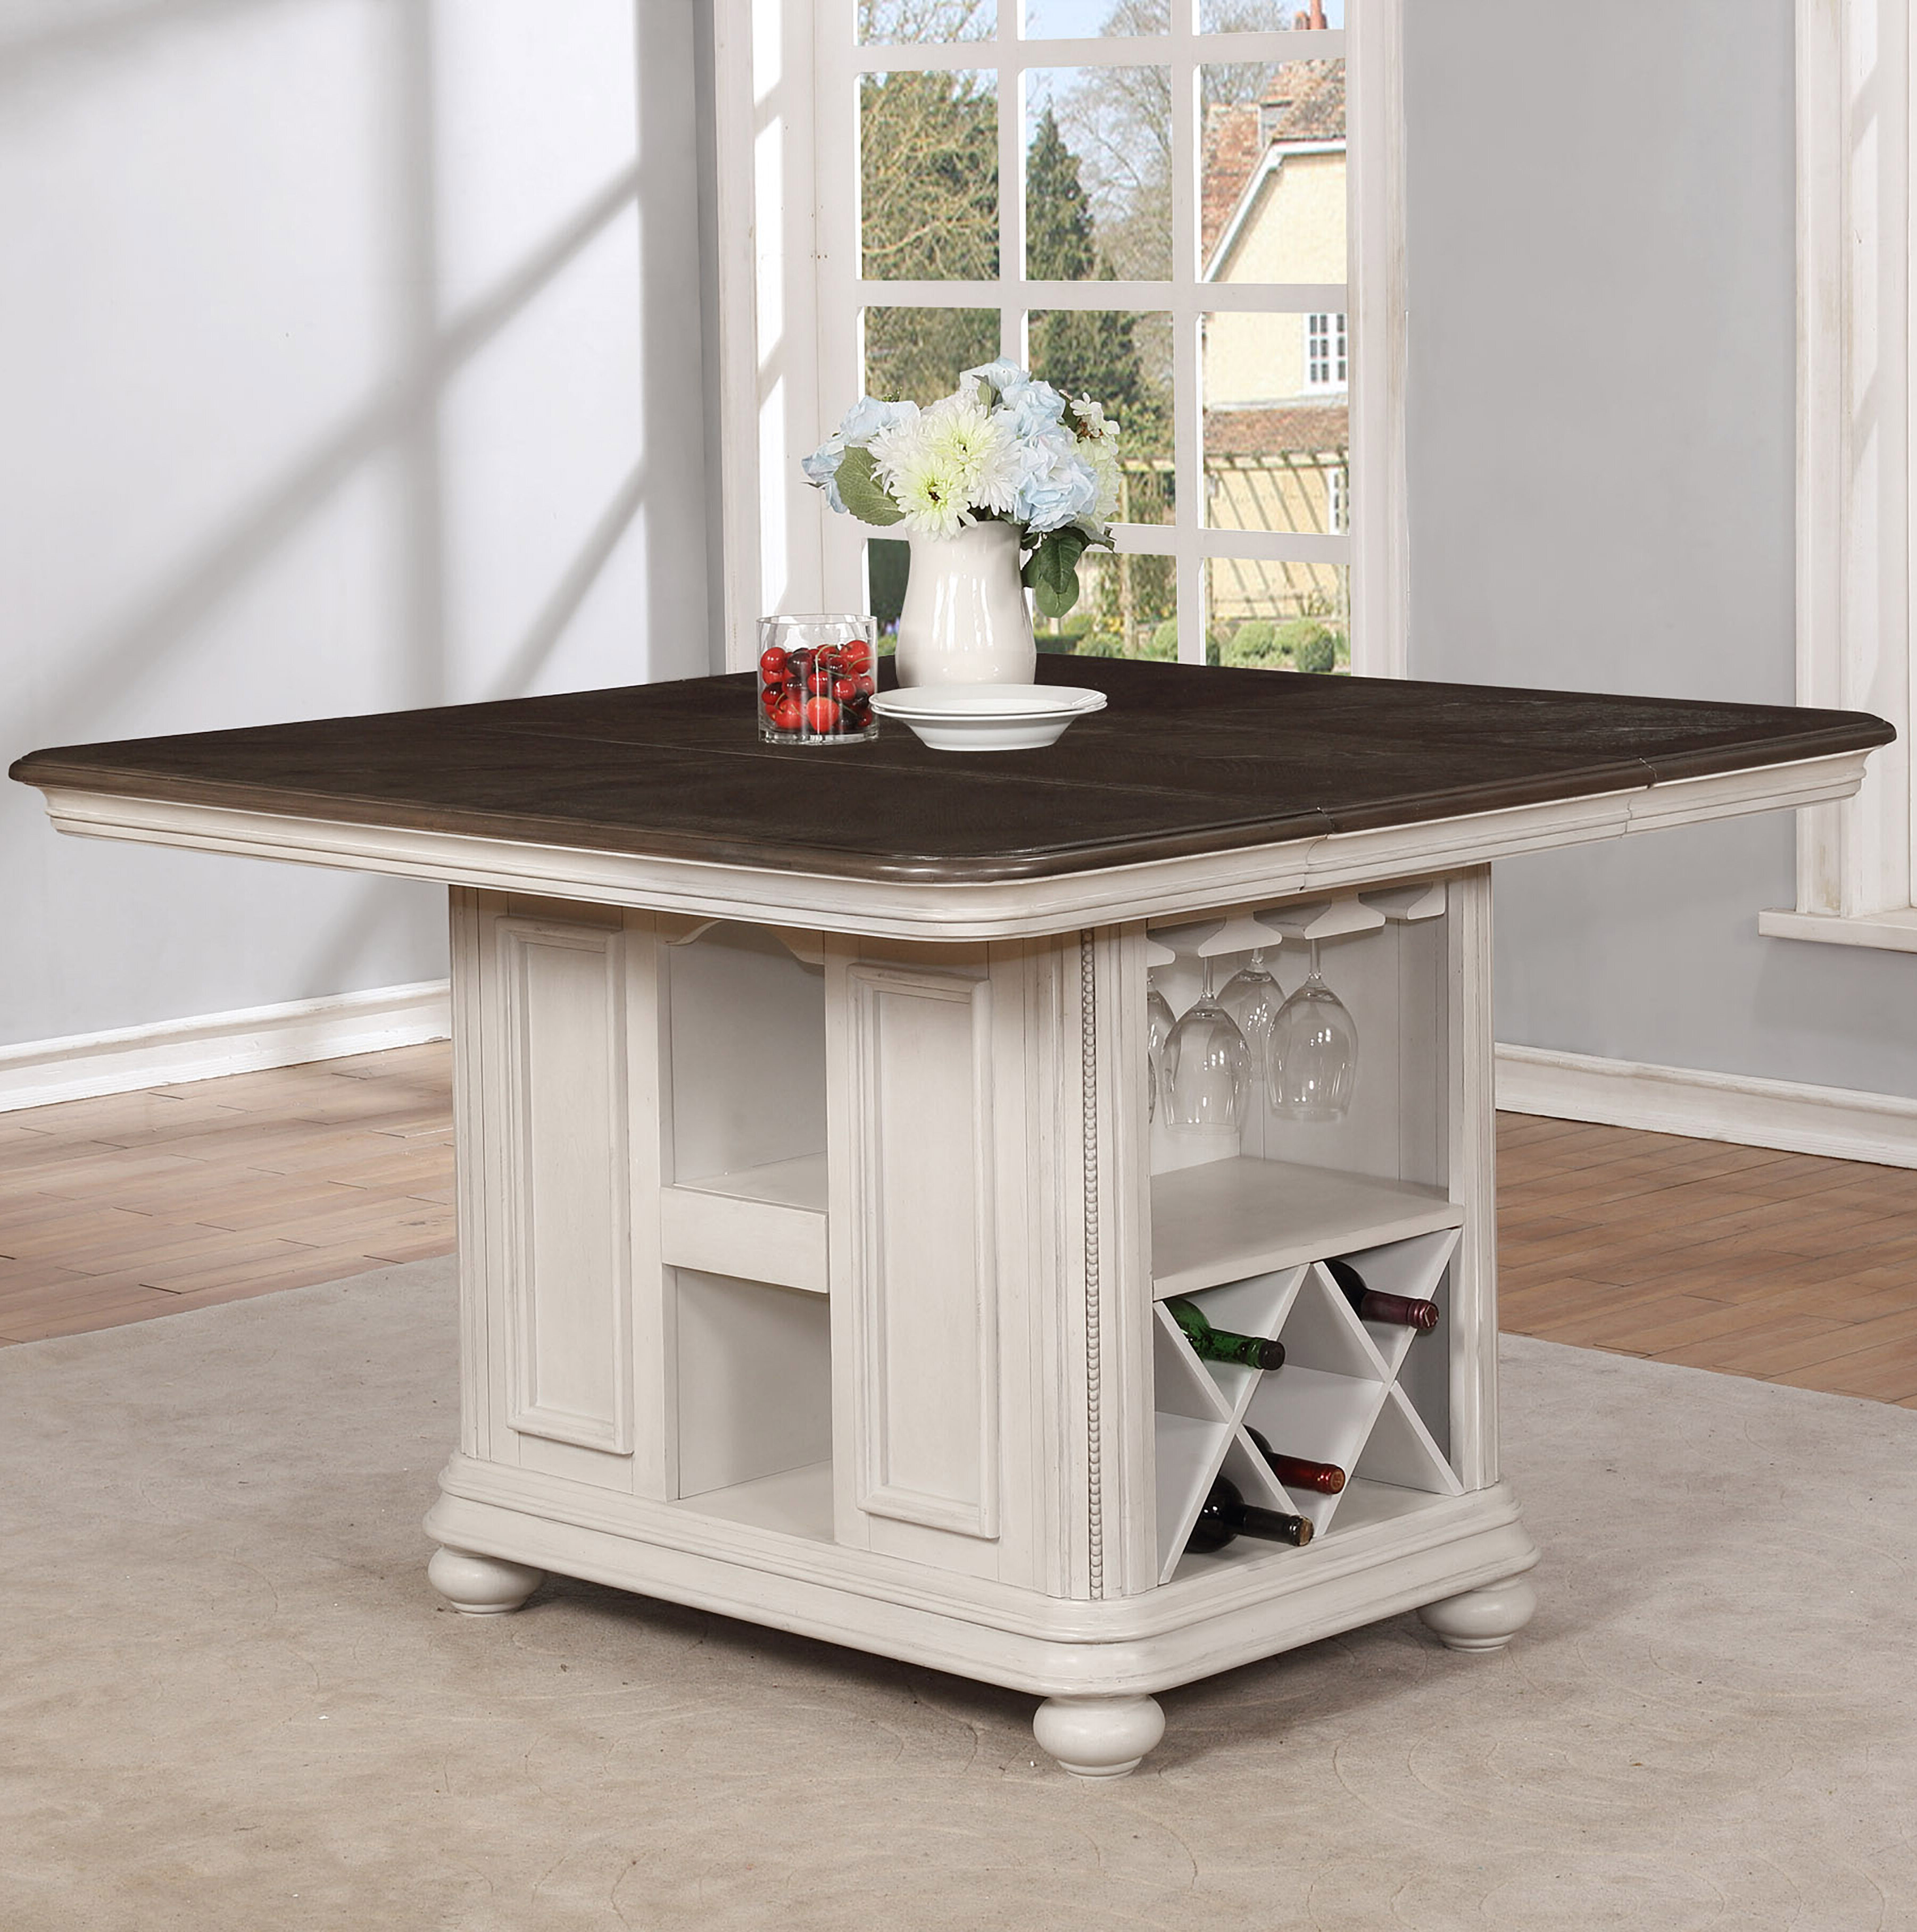 French Country Kitchen Islands Carts Youll Love In 2021 Wayfair